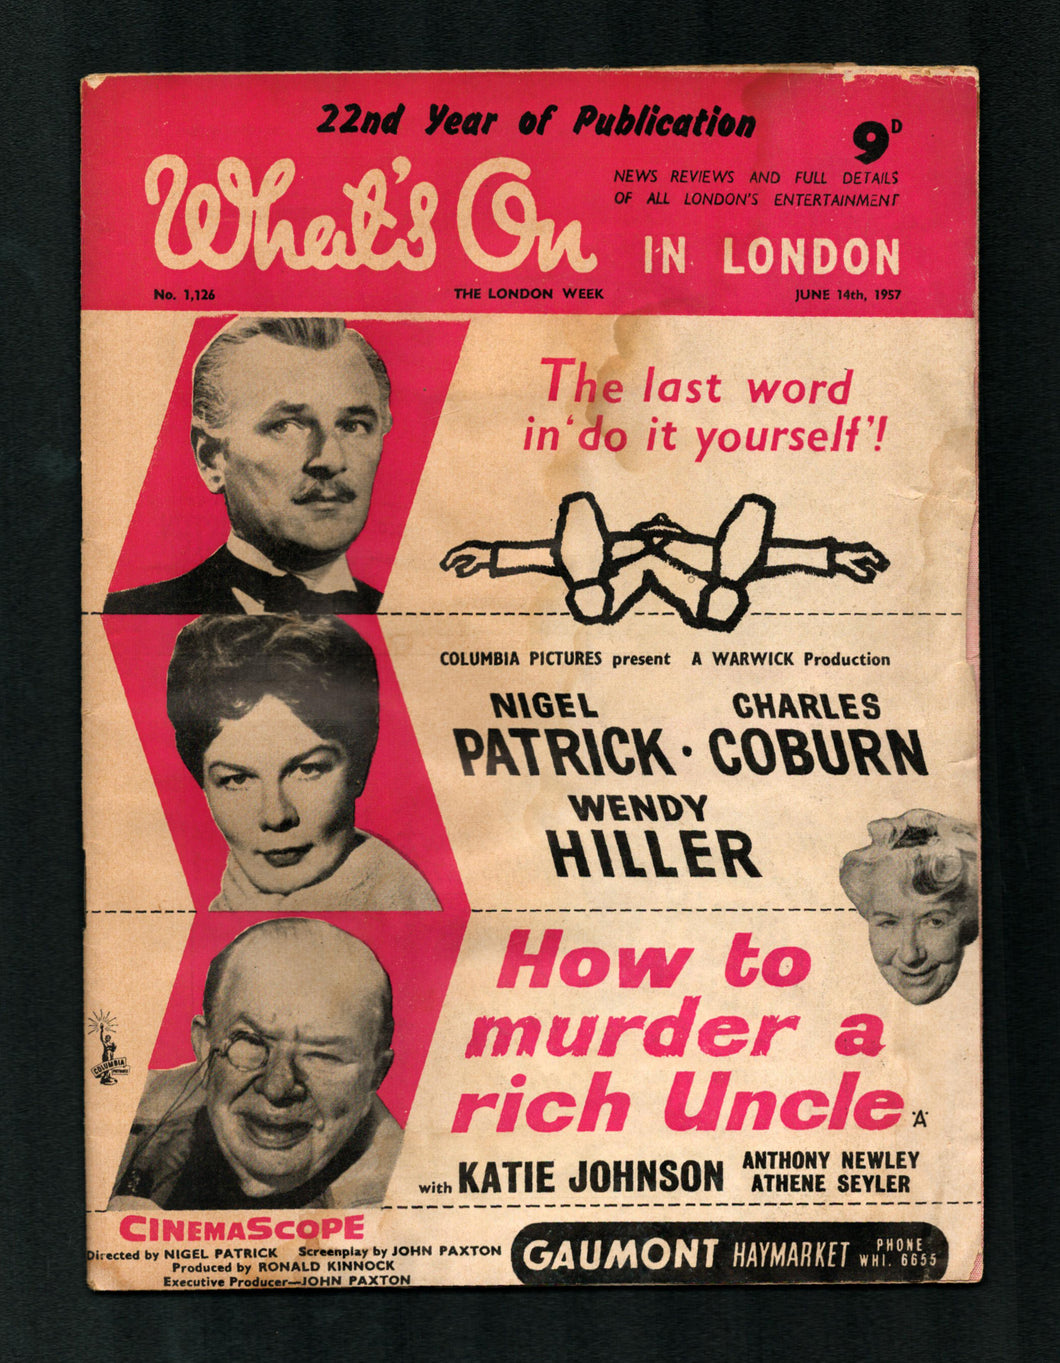 Whats on in London No 1126 June 14 1957